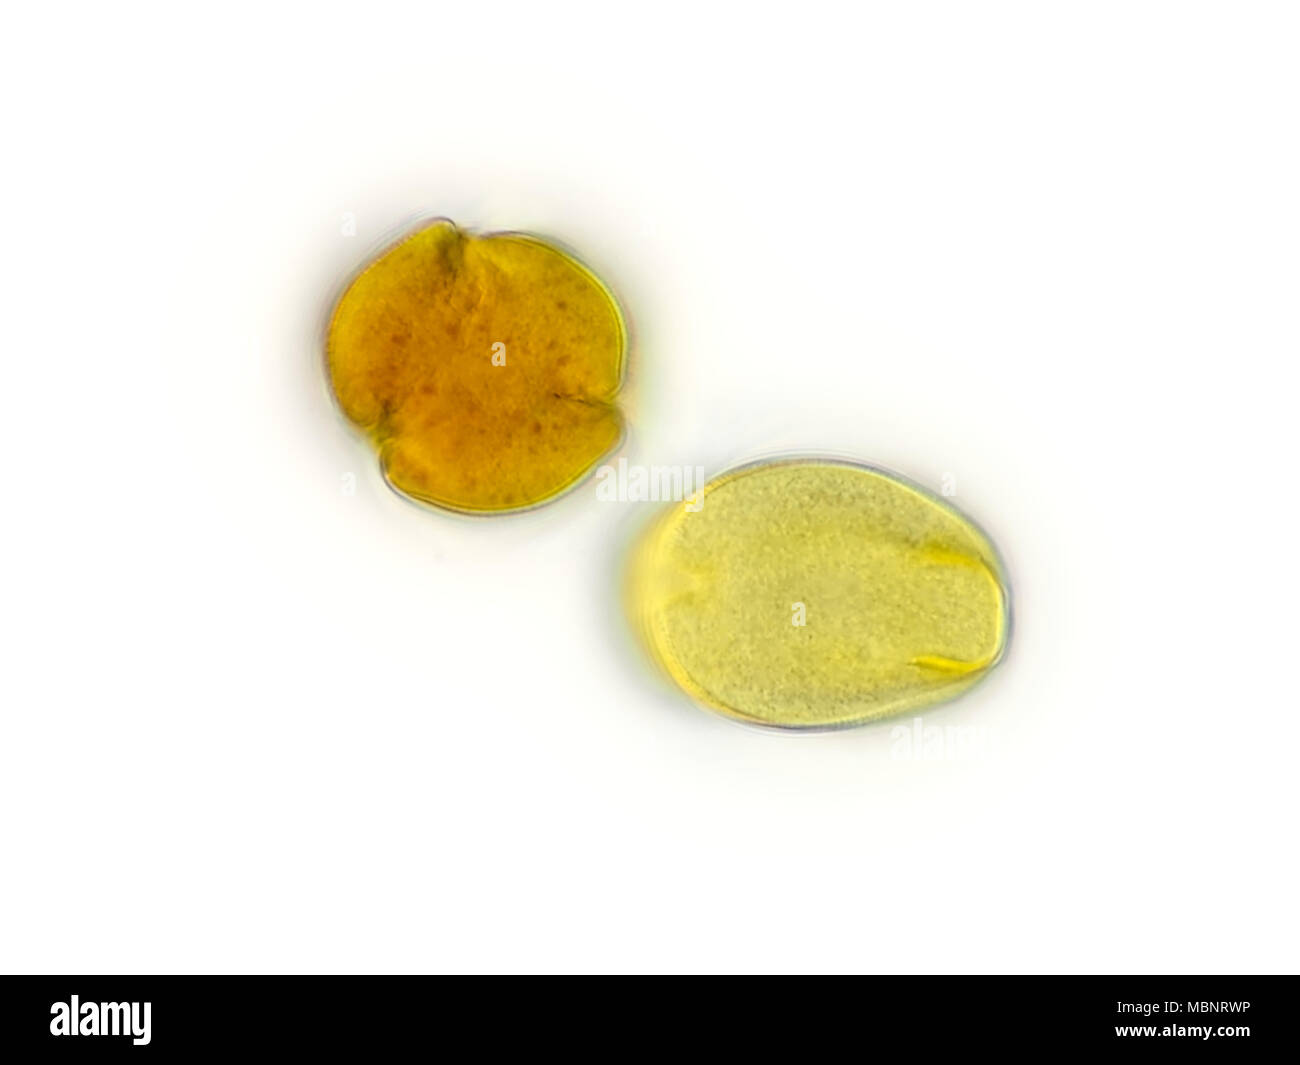 Light micrograph of 2 differently-oriented pollen grains (probably fruit tree pollen) from an air sample, pictured area is about 170 microns wide Stock Photo